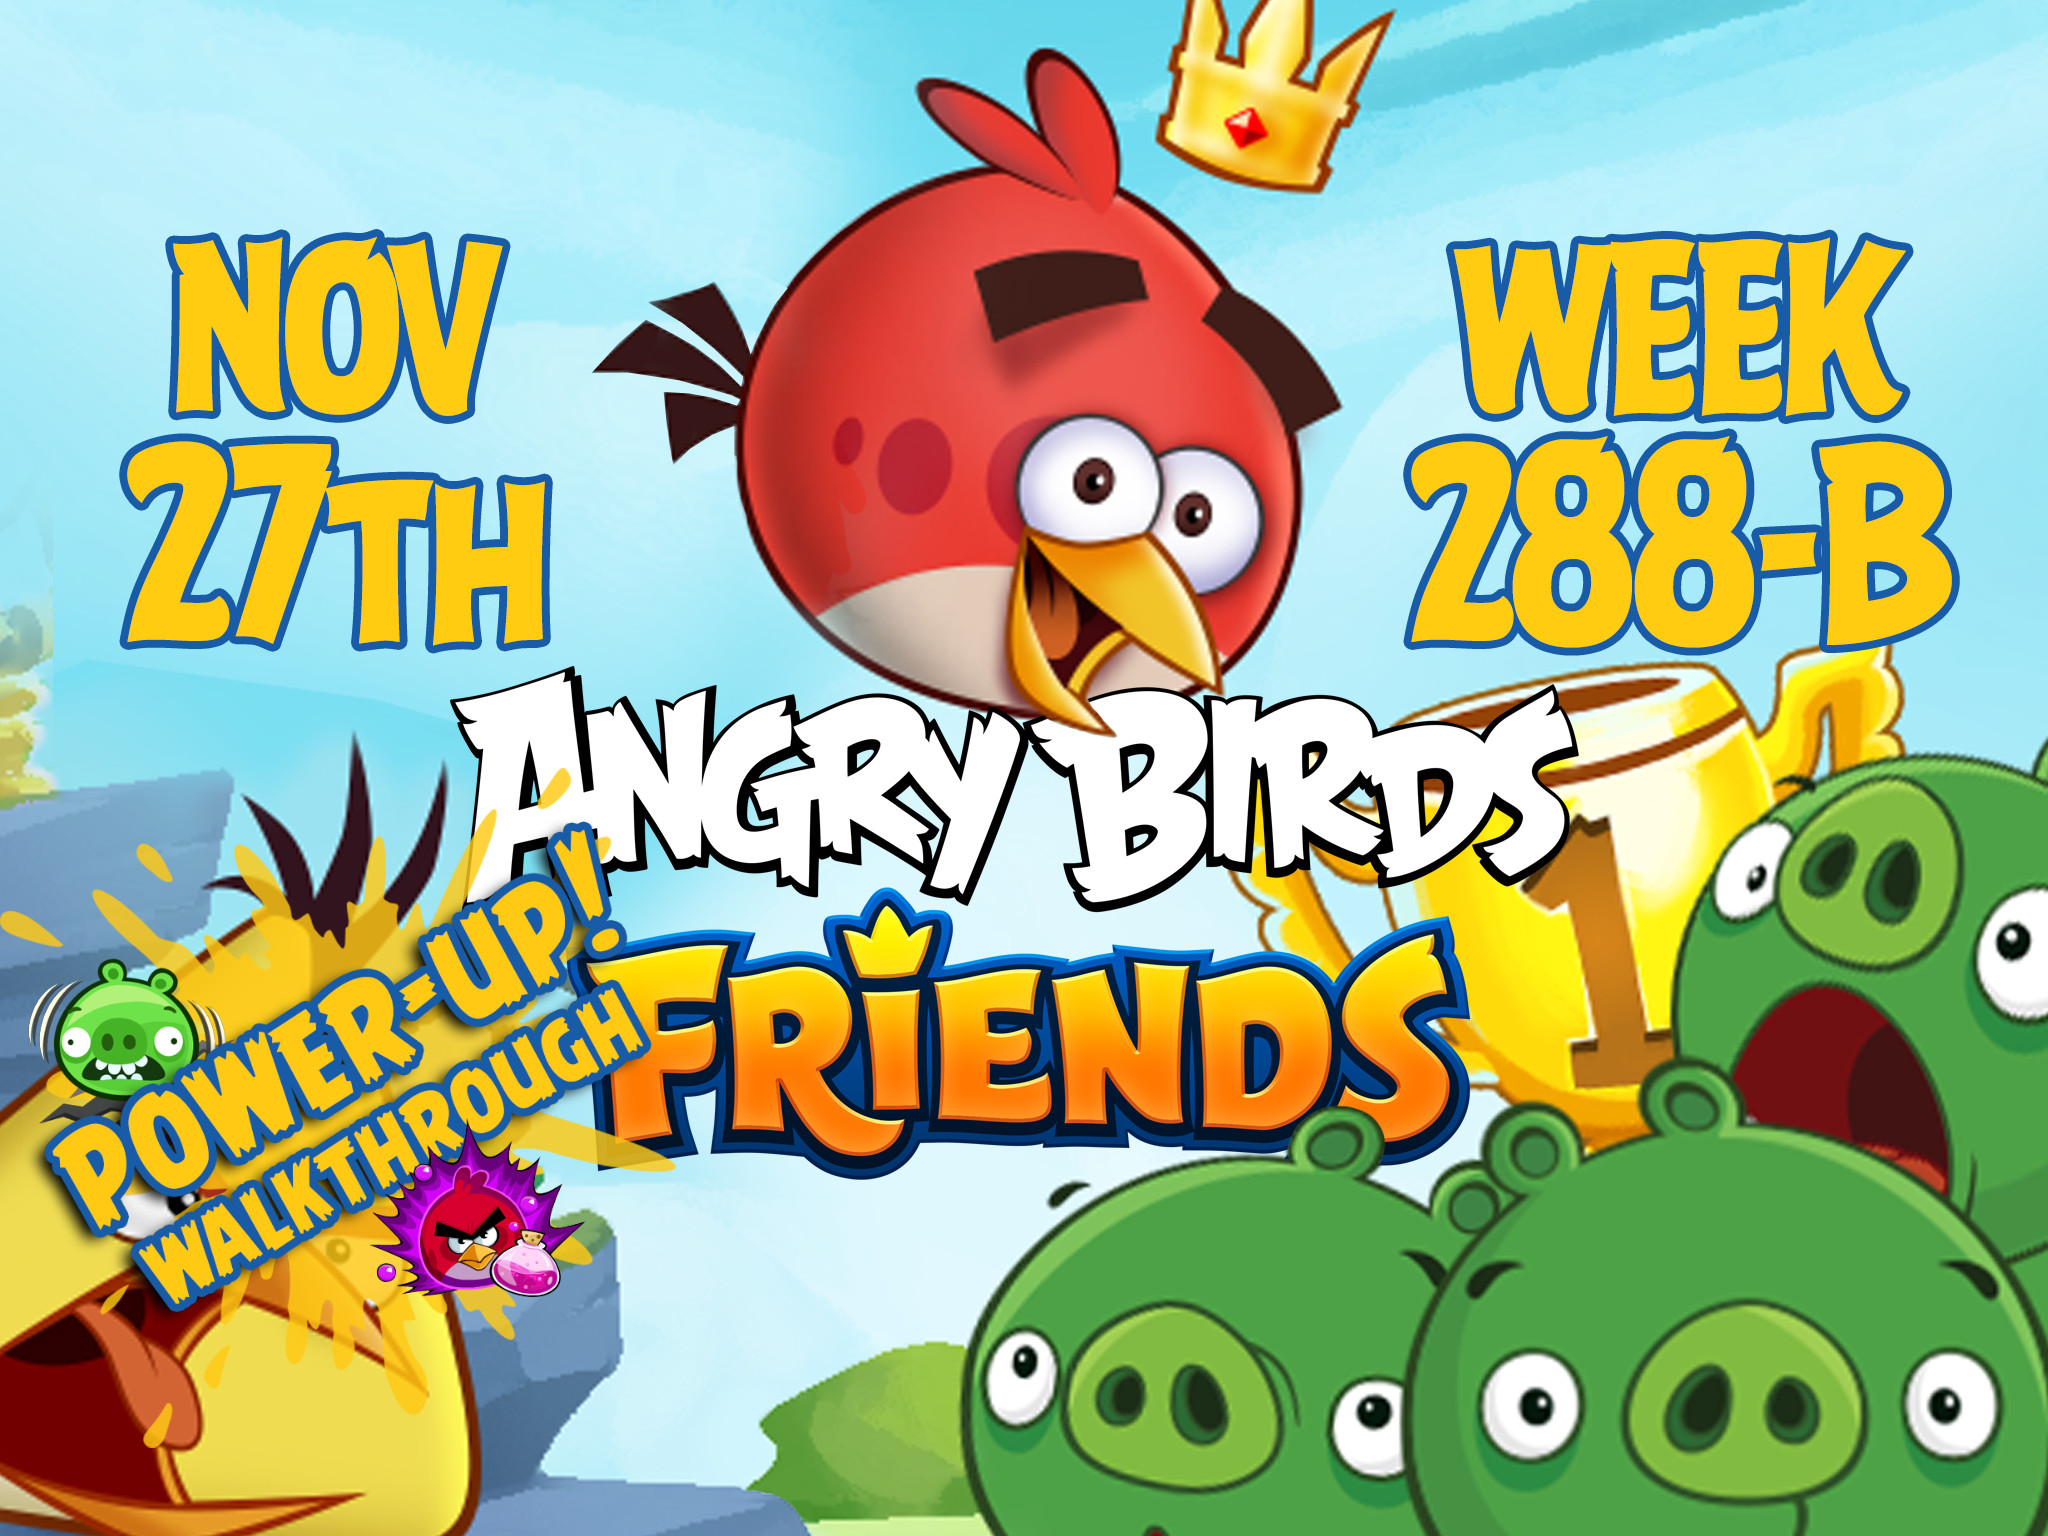 Angry Birds Friends Tournament Week 288-B Feature Image PU